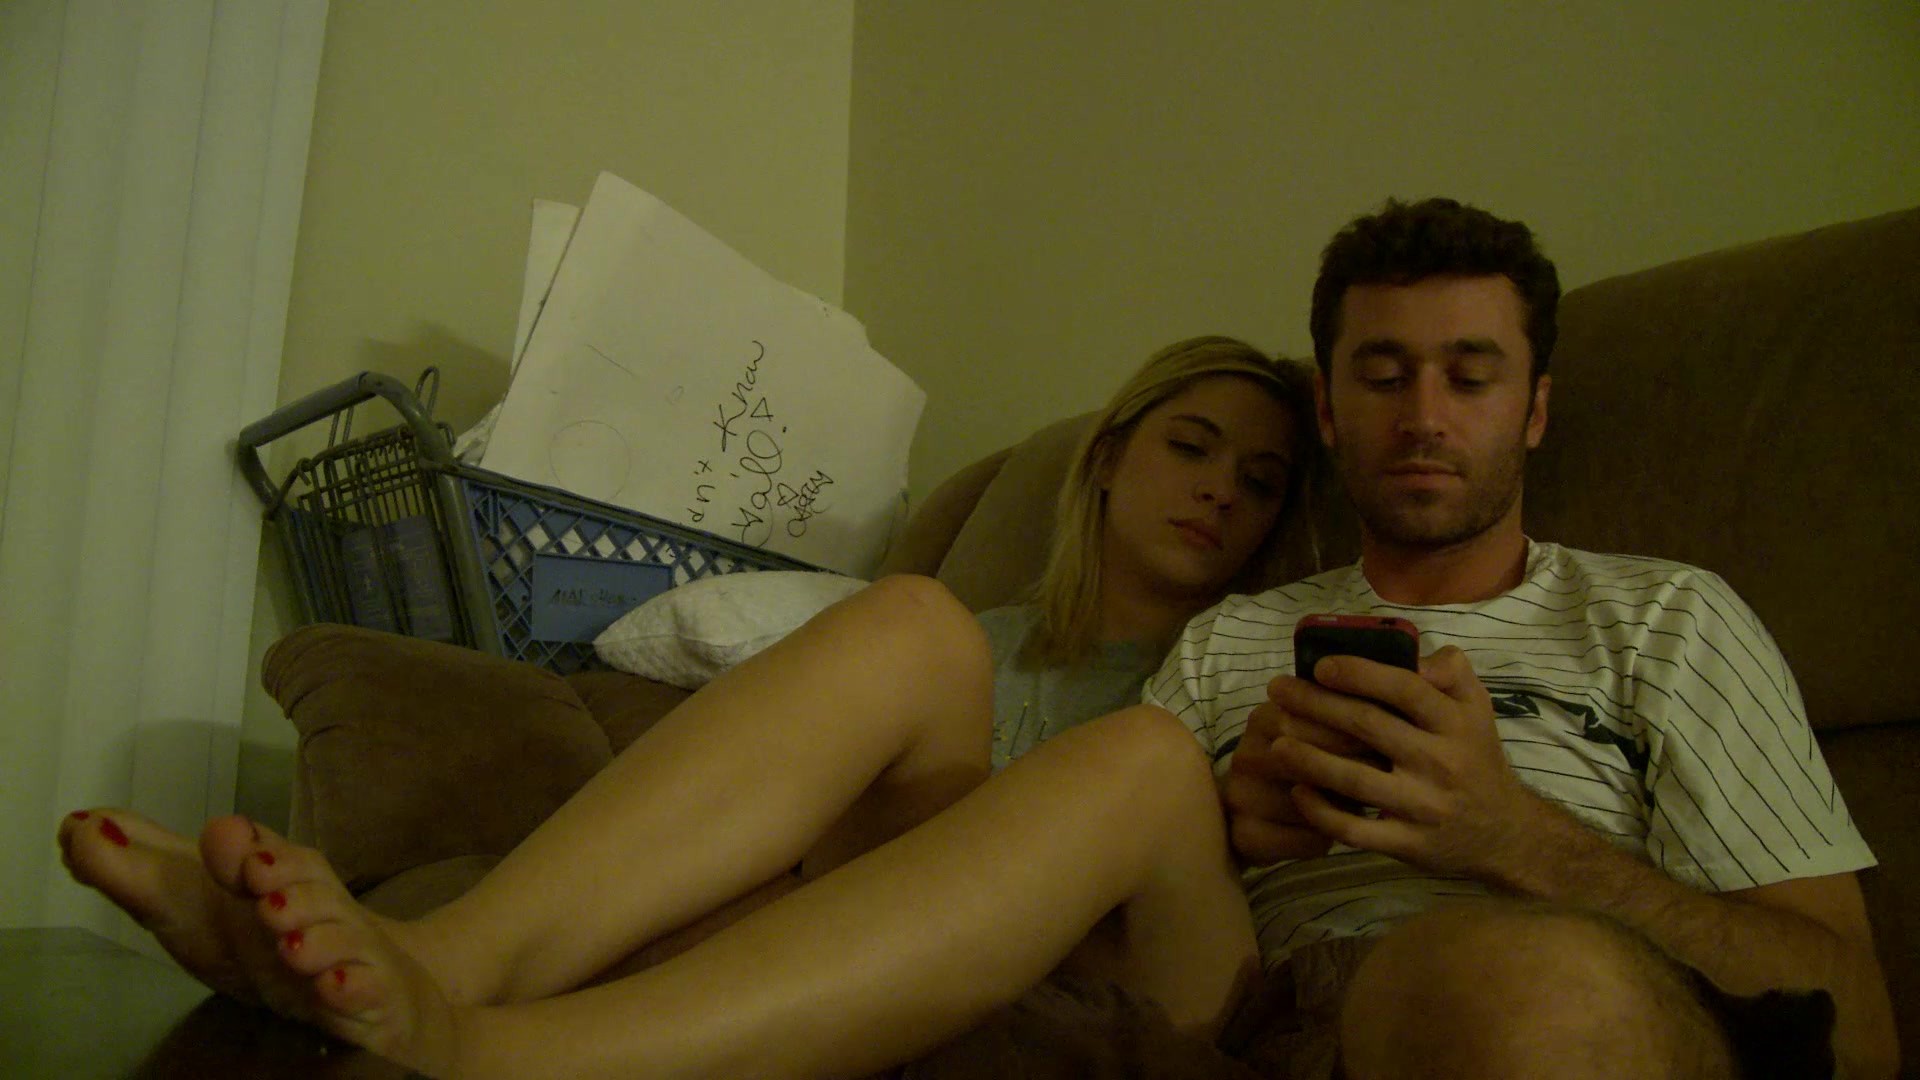 Trailers James Deen S Sex Tapes Off Set Sex Porn Movie Adult Dvd Empire